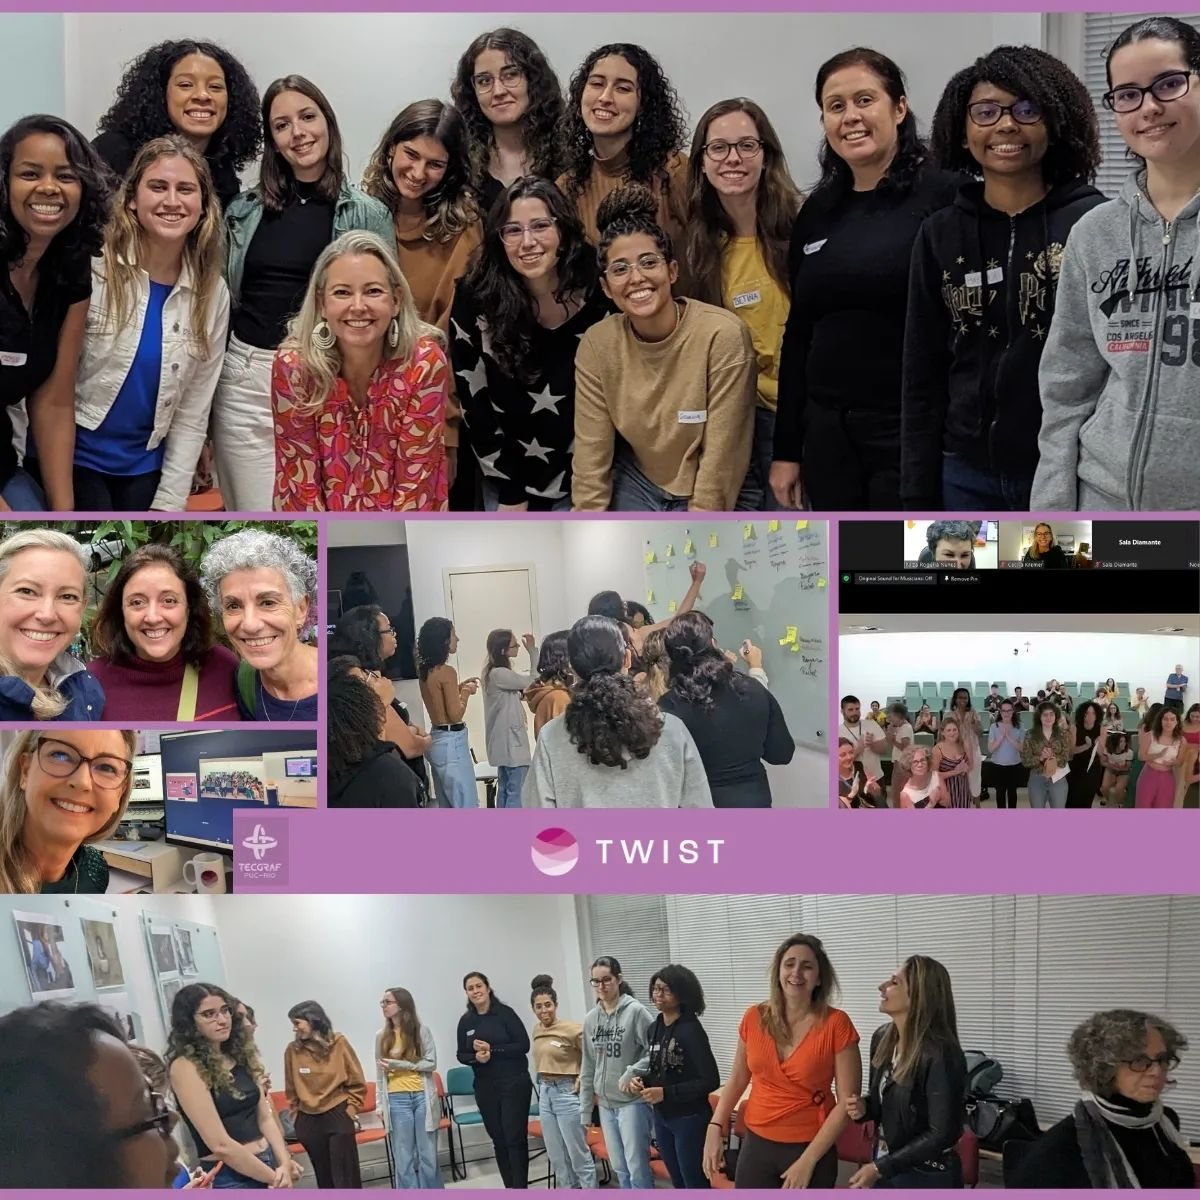 Community building is one of my current passions. This year I was invited to come back to my alma mater, PUC-Rio, to support the TWIST initiative: a program dedicated to stimulating female participation in Computer Science. I felt so honored. On July